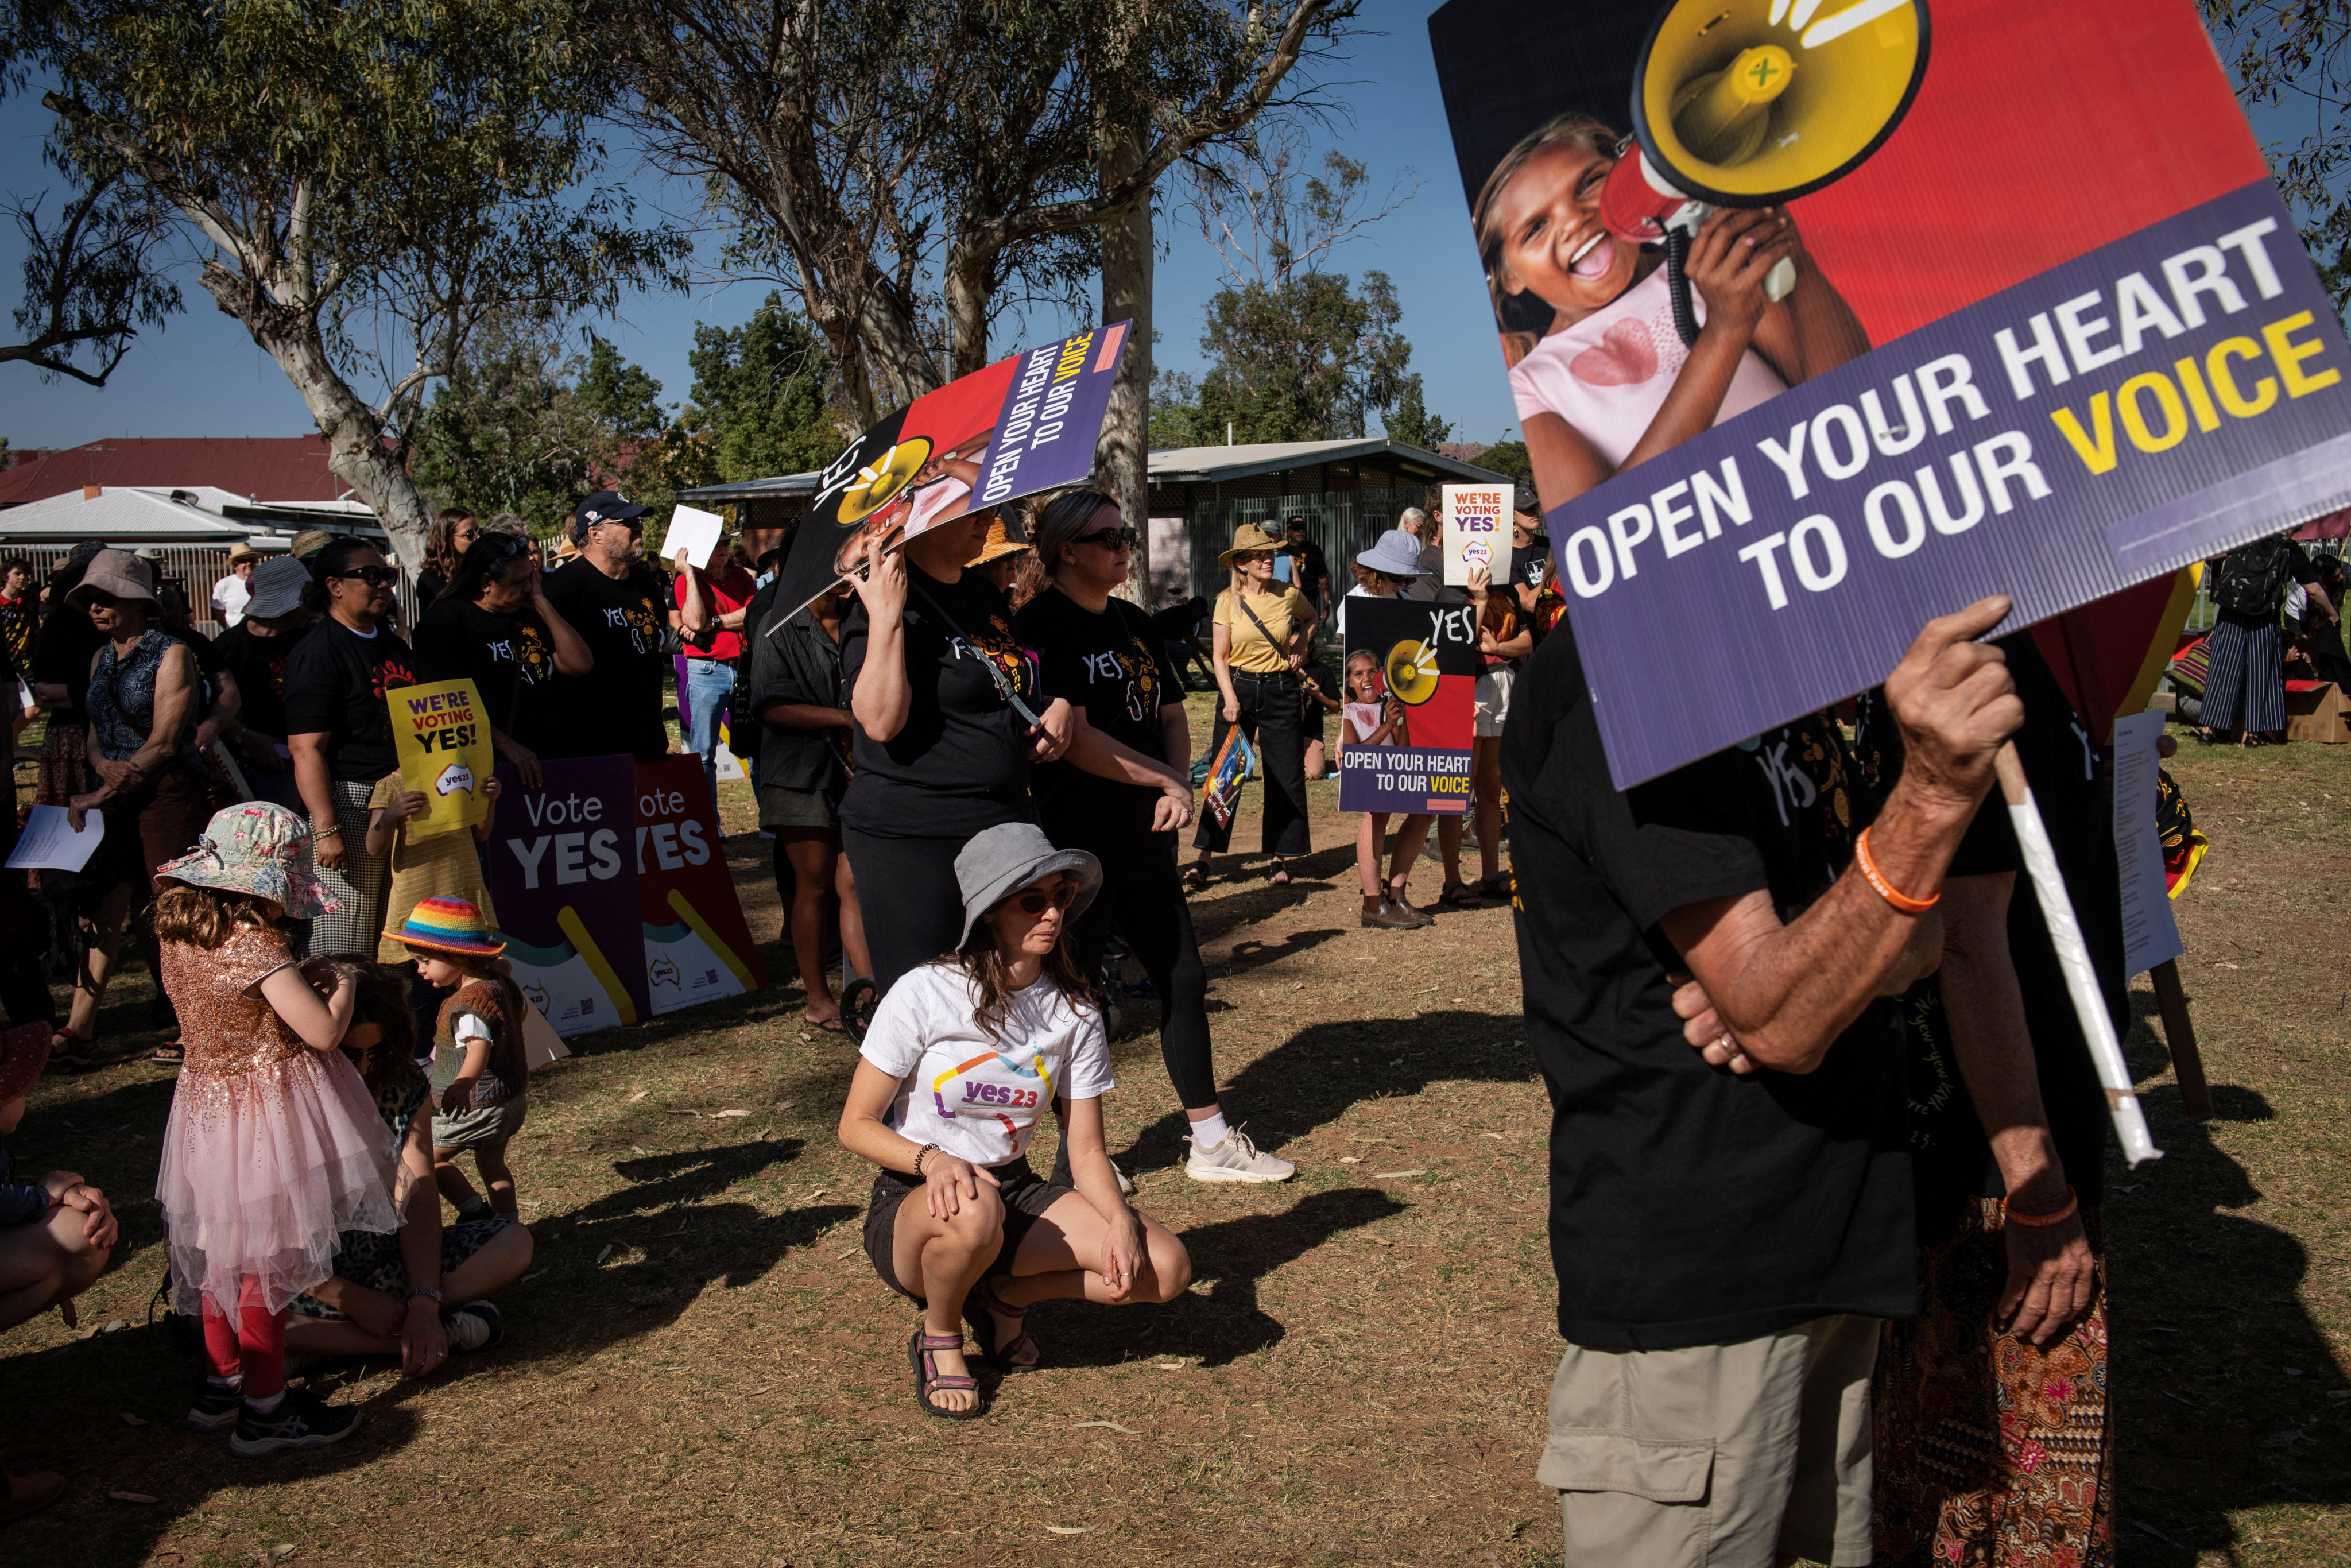 People rally for Australia’s upcoming referendum on Indigenous issues in Alice Springs. Photo: Reuters